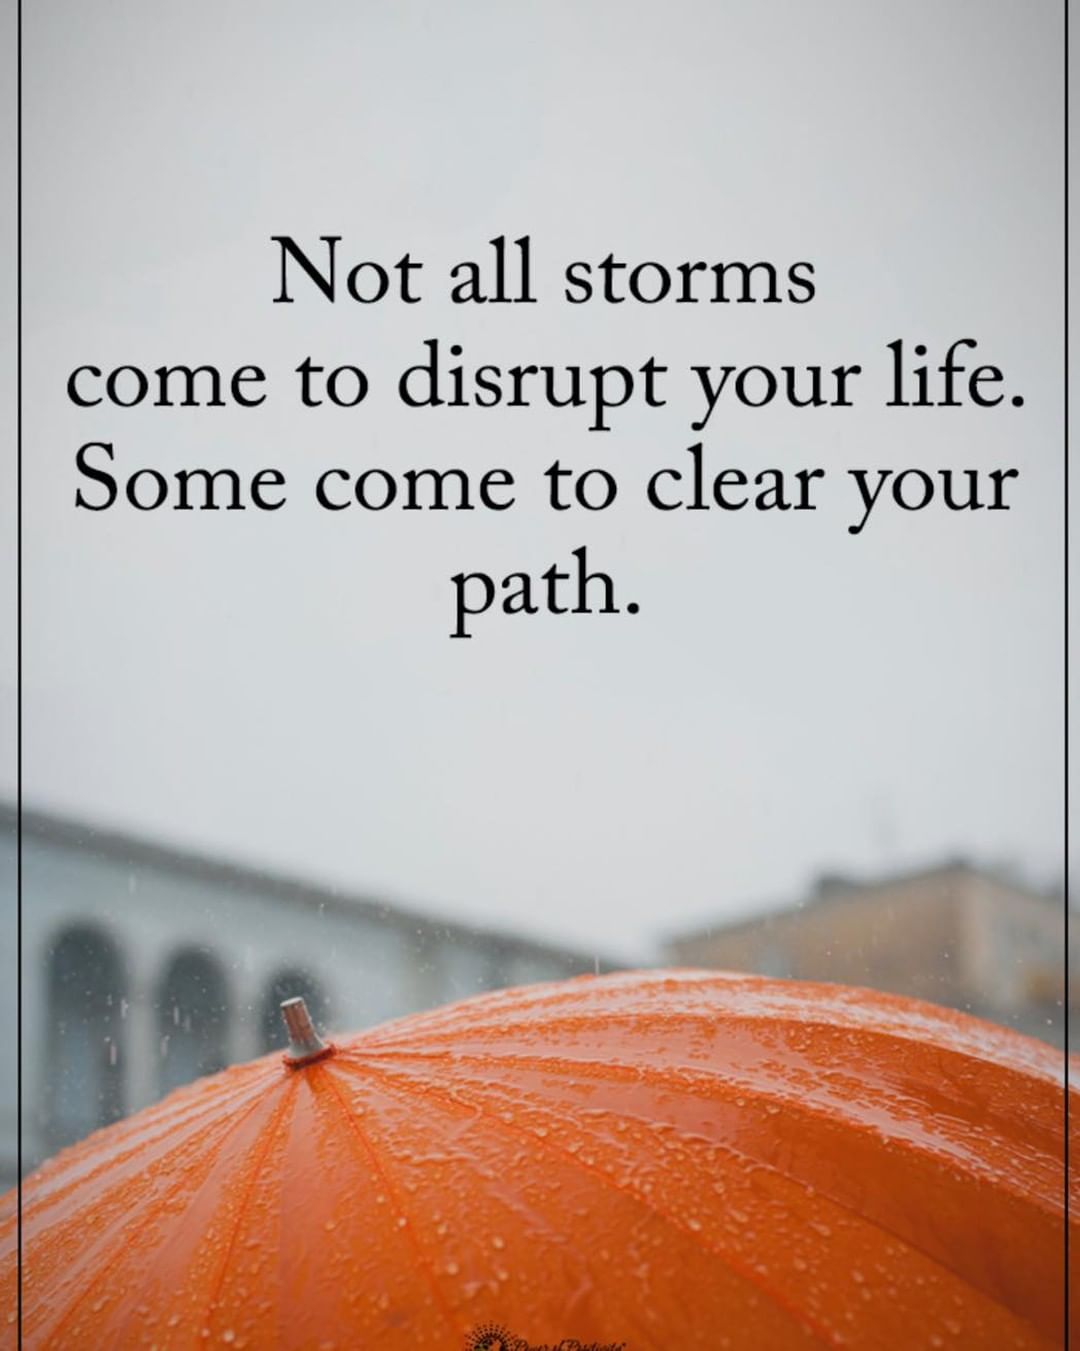 Not all storms come to disrupt your life. Some come to clear your path.